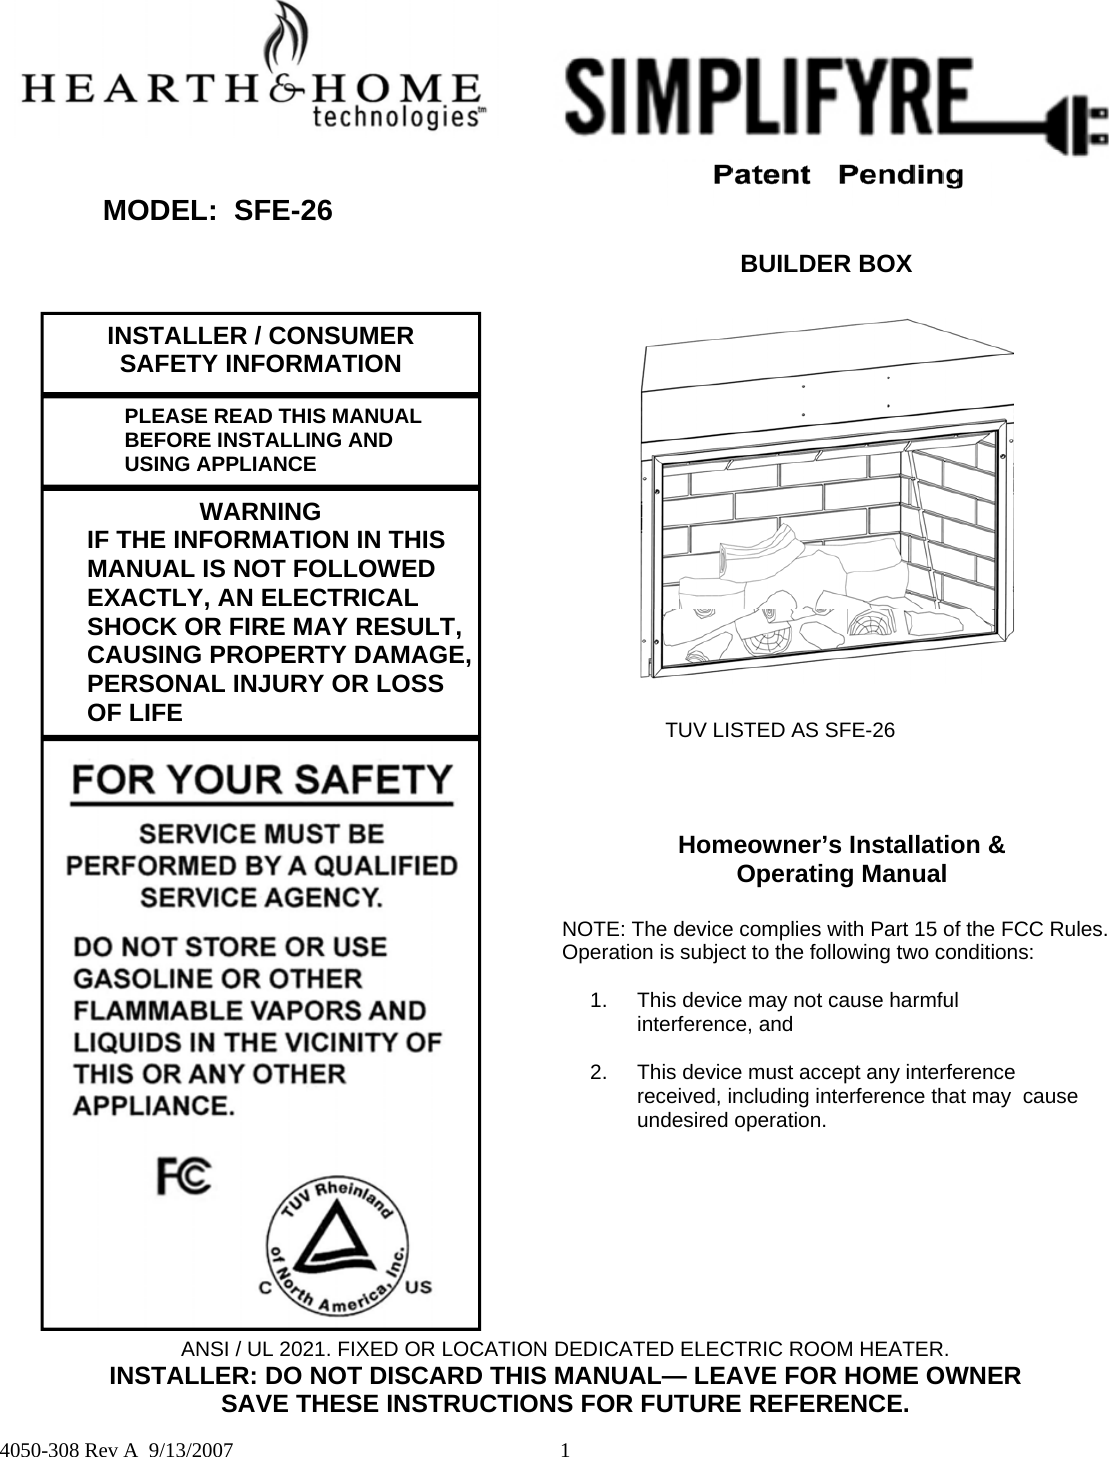  1  4050-308 Rev A  9/13/2007 MODEL:  SFE-26 BUILDER BOX INSTALLER / CONSUMER SAFETY INFORMATION  PLEASE READ THIS MANUAL   BEFORE INSTALLING AND  USING APPLIANCE WARNING   IF THE INFORMATION IN THIS    MANUAL IS NOT FOLLOWED   EXACTLY, AN ELECTRICAL   SHOCK OR FIRE MAY RESULT,   CAUSING PROPERTY DAMAGE,   PERSONAL INJURY OR LOSS  OF LIFE  TUV LISTED AS SFE-26 Homeowner’s Installation &amp;  Operating Manual  NOTE: The device complies with Part 15 of the FCC Rules.  Operation is subject to the following two conditions:  1.  This device may not cause harmful     interference, and  2.    This device must accept any interference    received, including interference that may  cause     undesired operation. ANSI / UL 2021. FIXED OR LOCATION DEDICATED ELECTRIC ROOM HEATER. INSTALLER: DO NOT DISCARD THIS MANUAL— LEAVE FOR HOME OWNER SAVE THESE INSTRUCTIONS FOR FUTURE REFERENCE. 